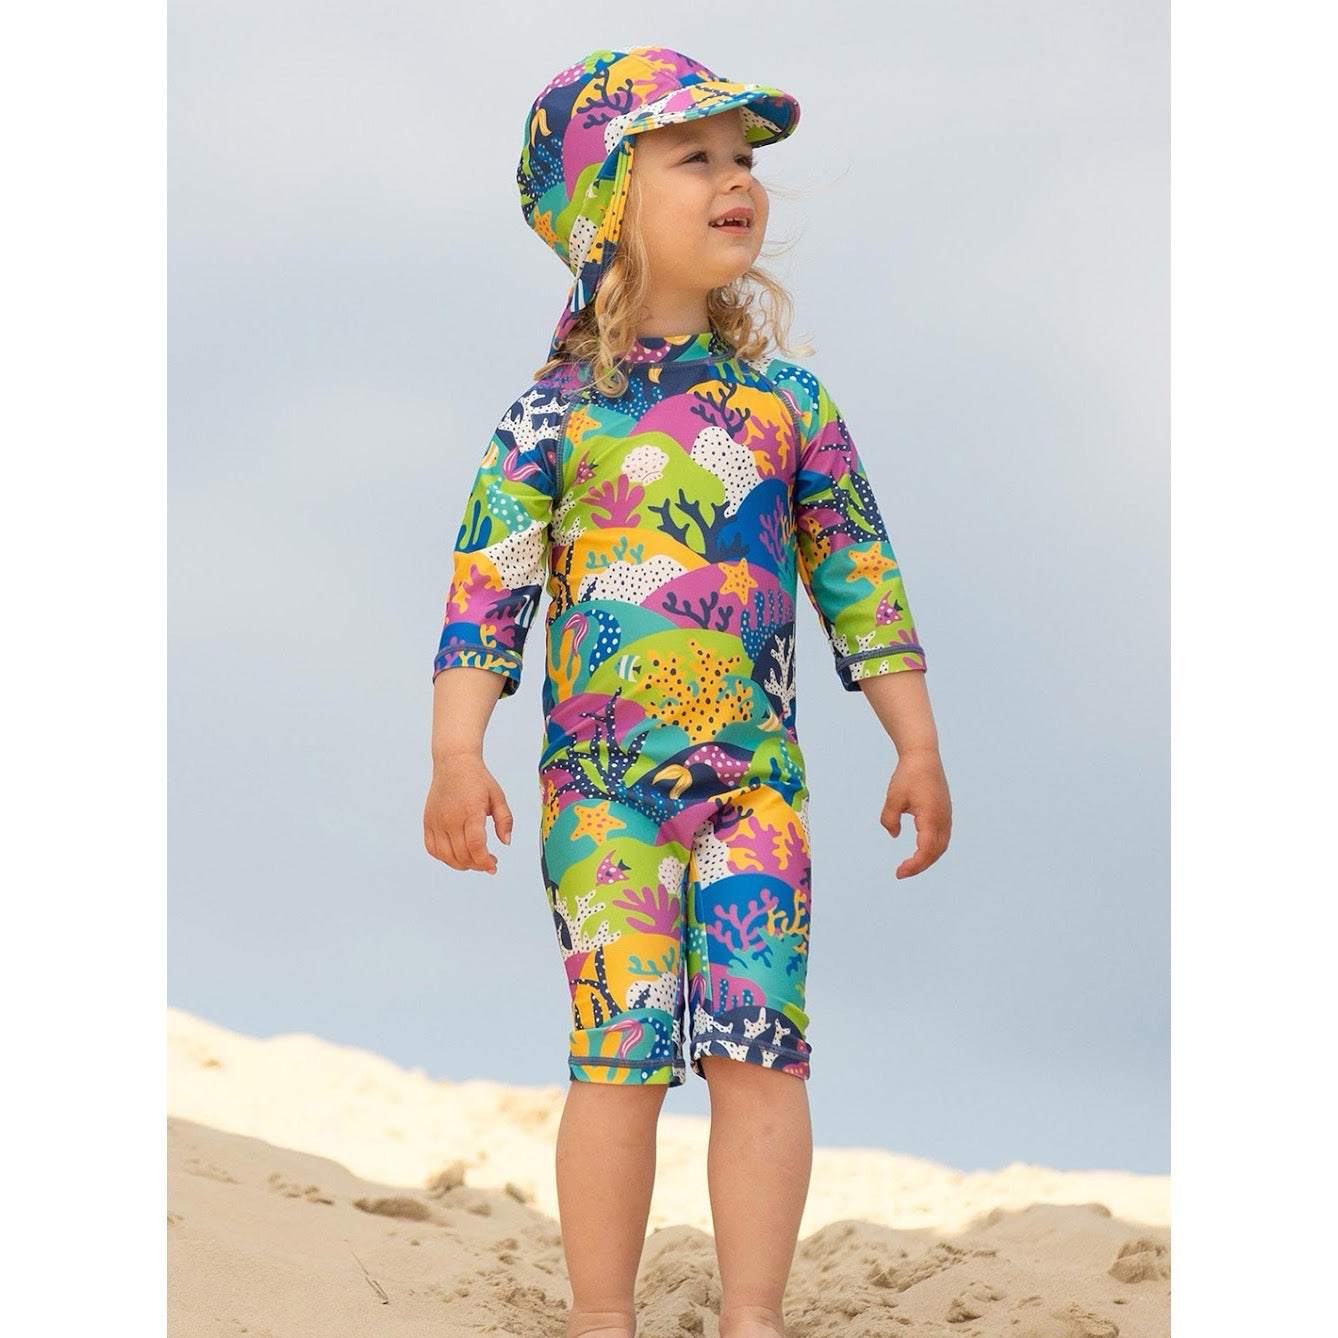 Kite Coral Reef Infant Sunsuit Clothing 3-6M / Multi,6-9M / Multi,9-12M / Multi,12-18M / Multi,18-24M/2Y / Multi